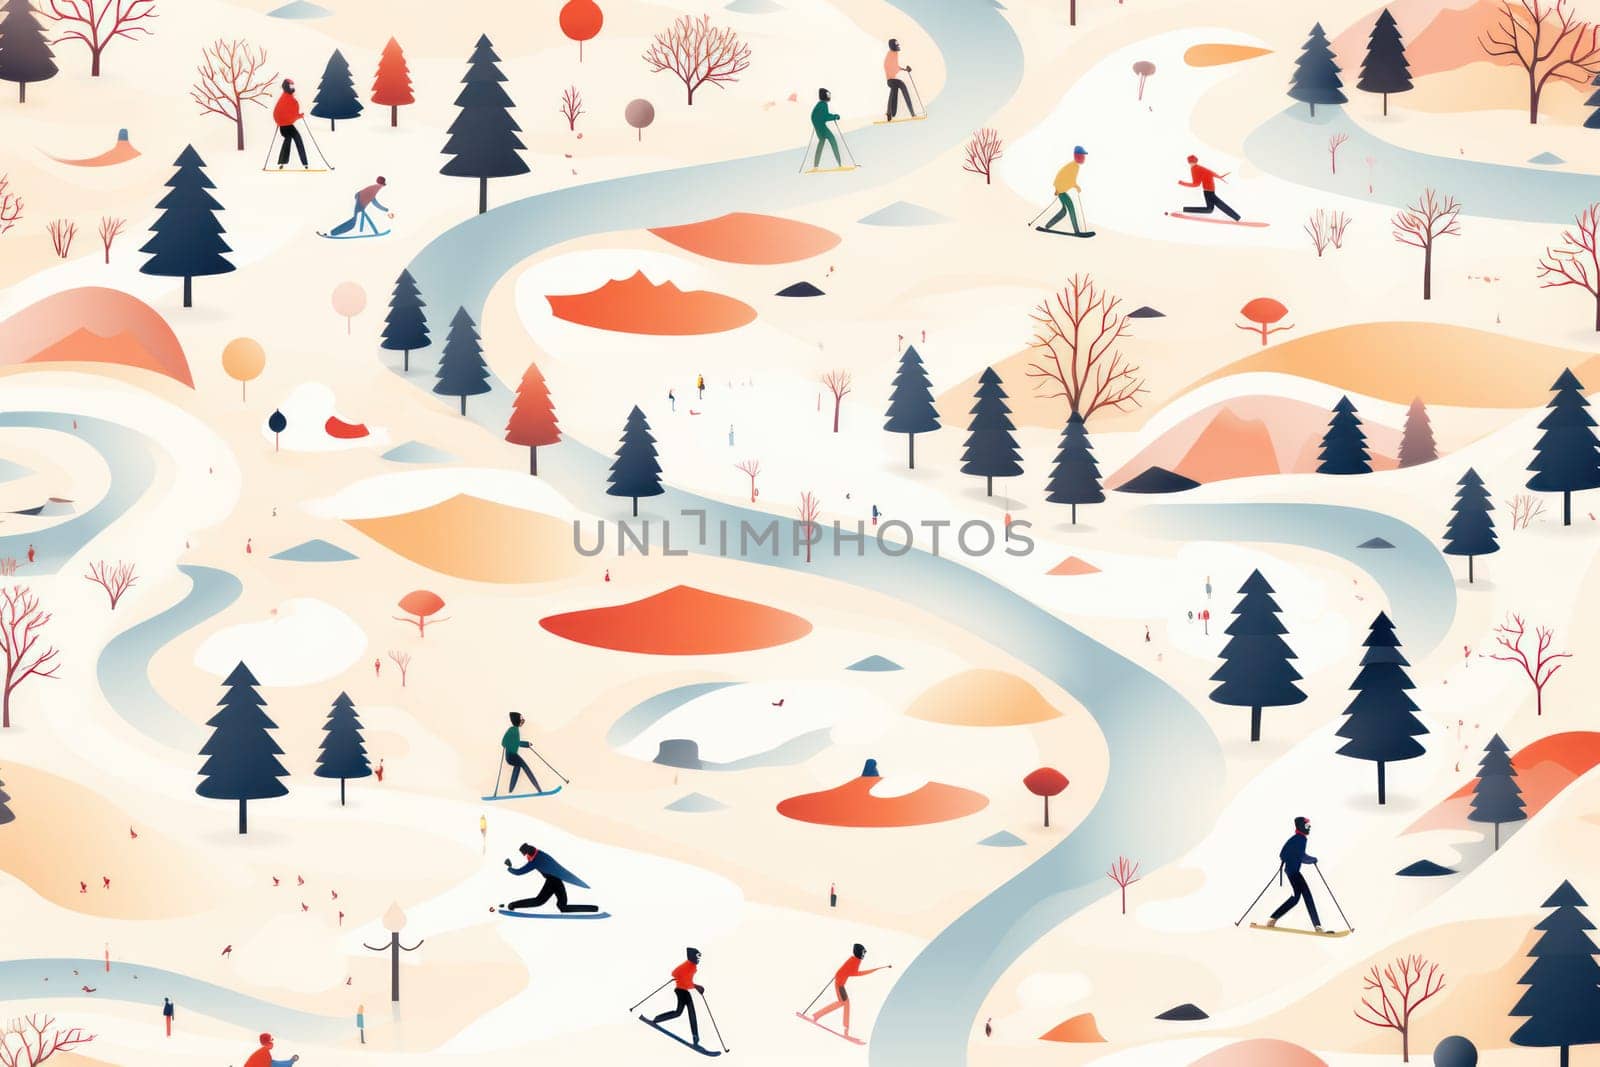 A dynamic portrayal of the exhilarating winter season, featuring individuals engaged in a range of invigorating activities such as skiing, snowboarding, and ice skating.